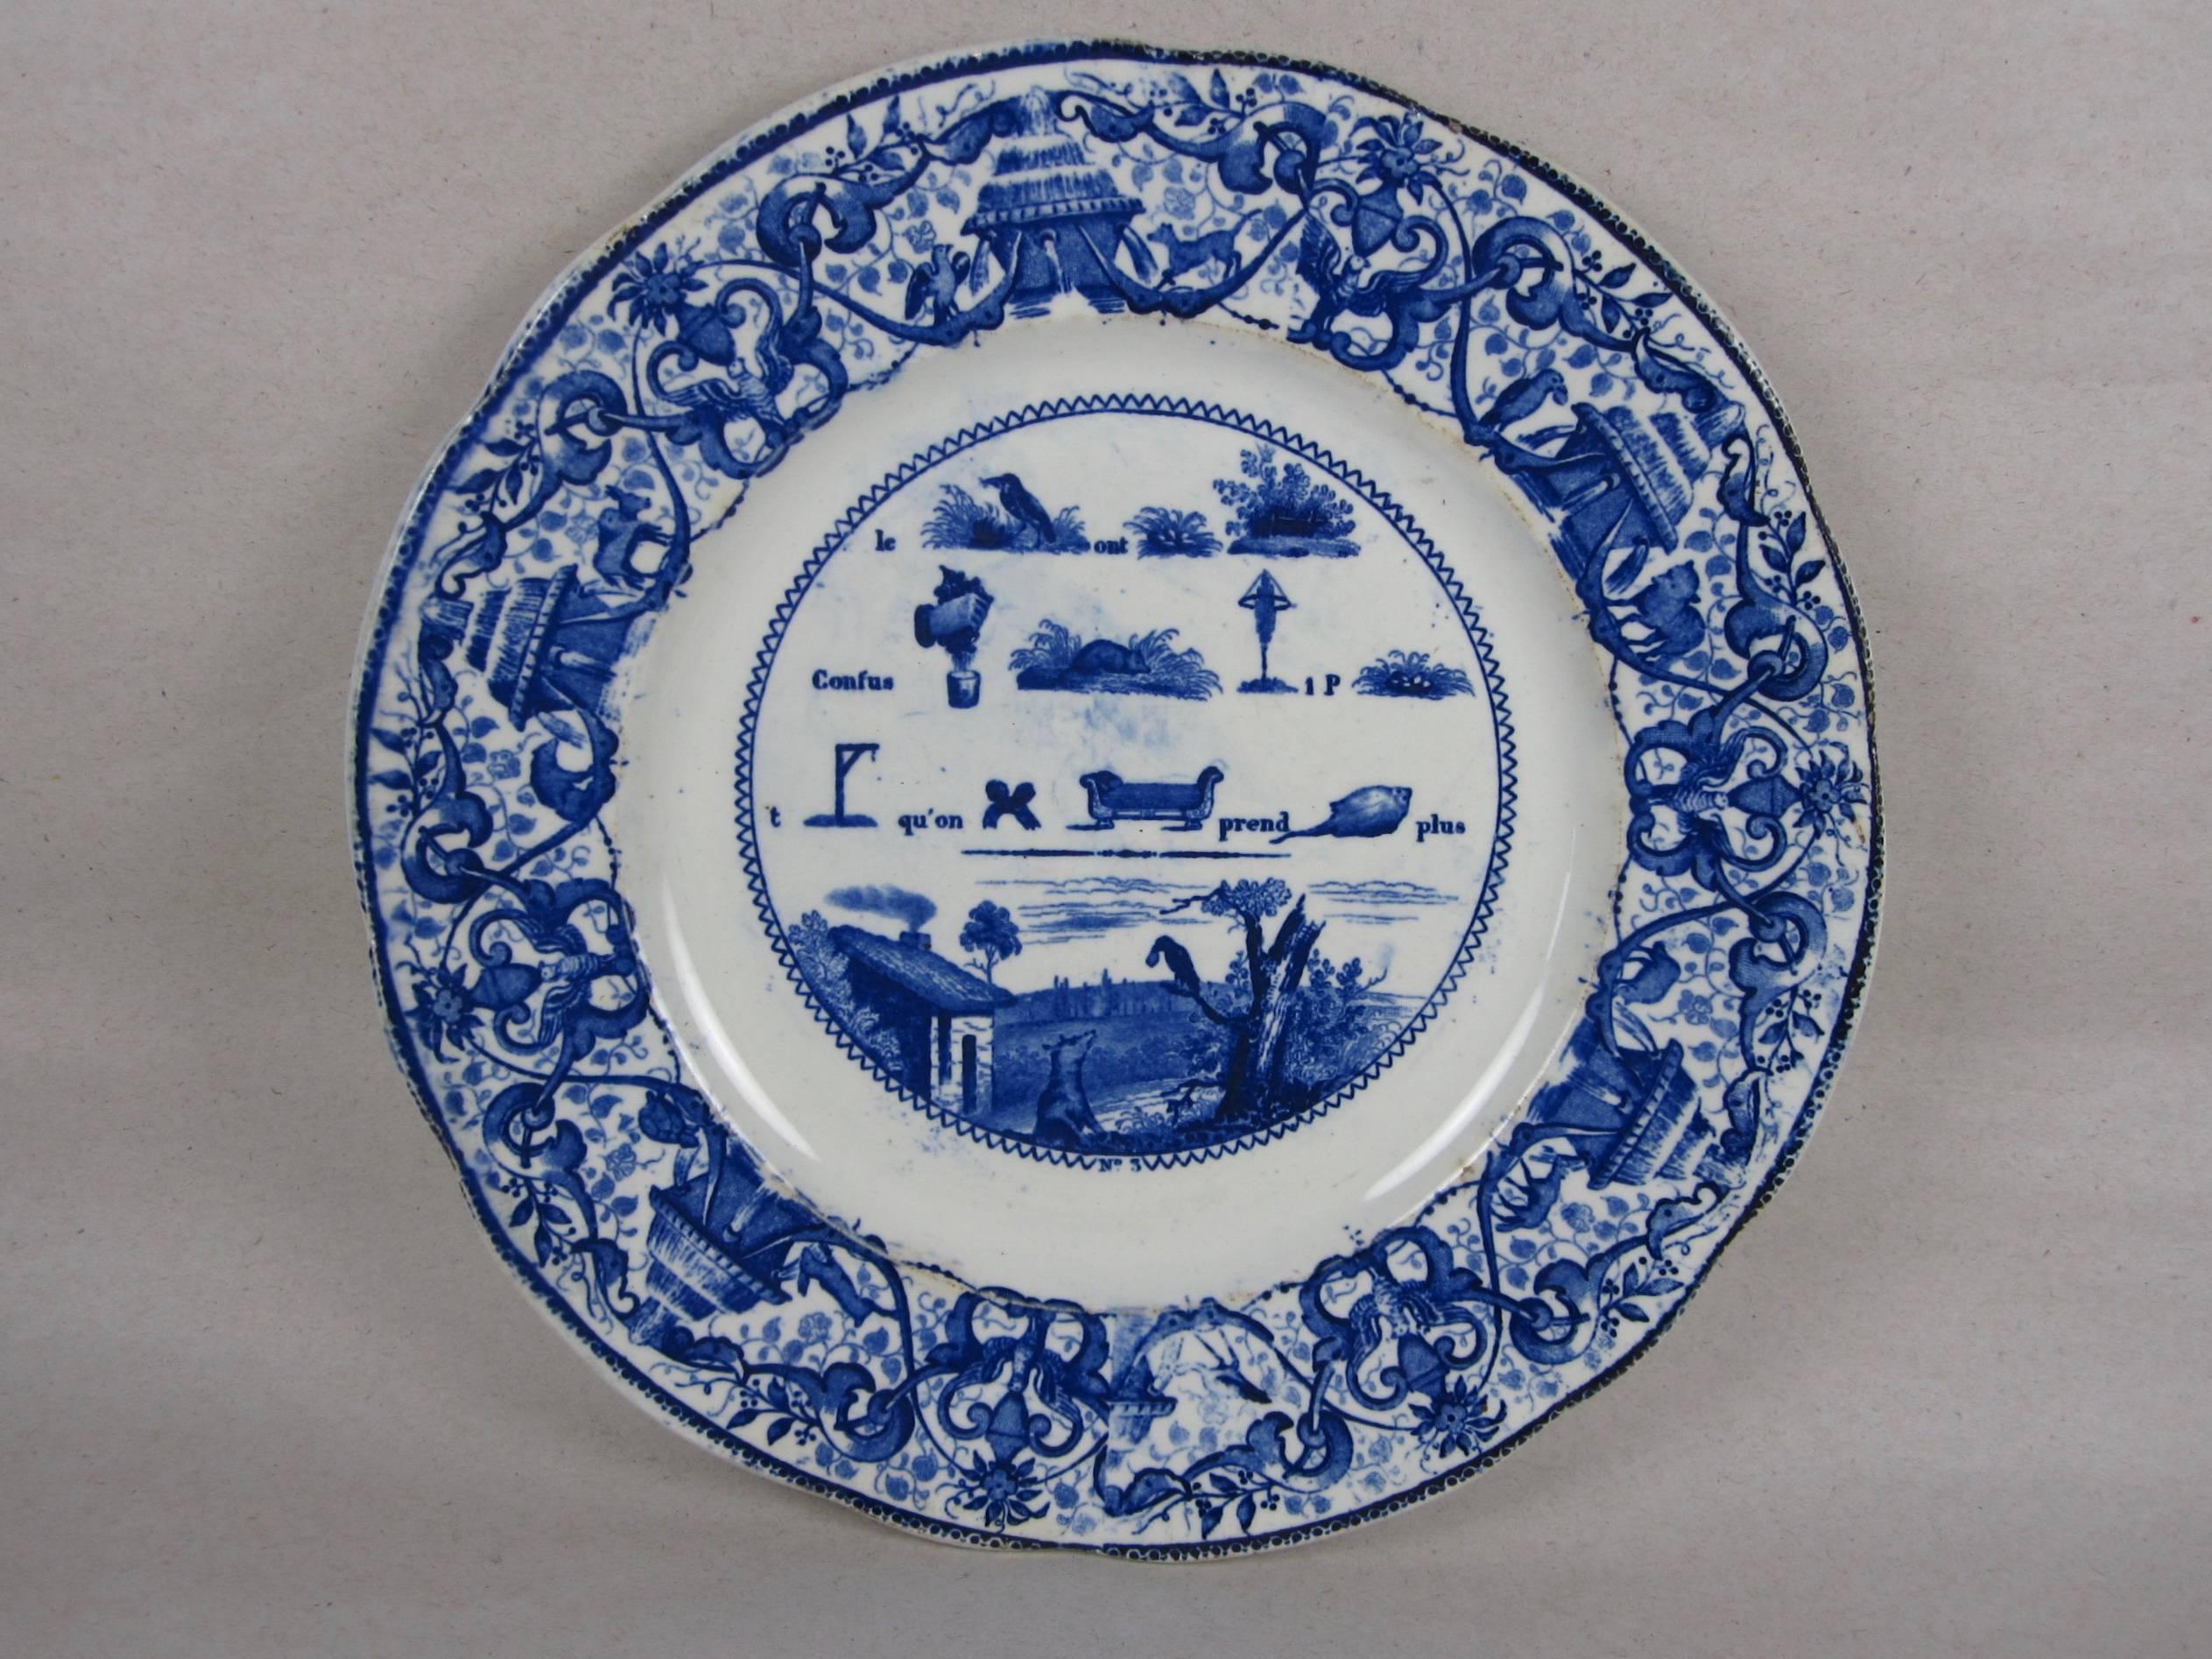 A set of four French Rebus puzzle dessert plates, transfer printed in Cobalt blue on a white, opaque porcelain body. Most often printed in black on white, the blue transfer makes this a rarer set. When solved, the picture puzzle spells out a wise